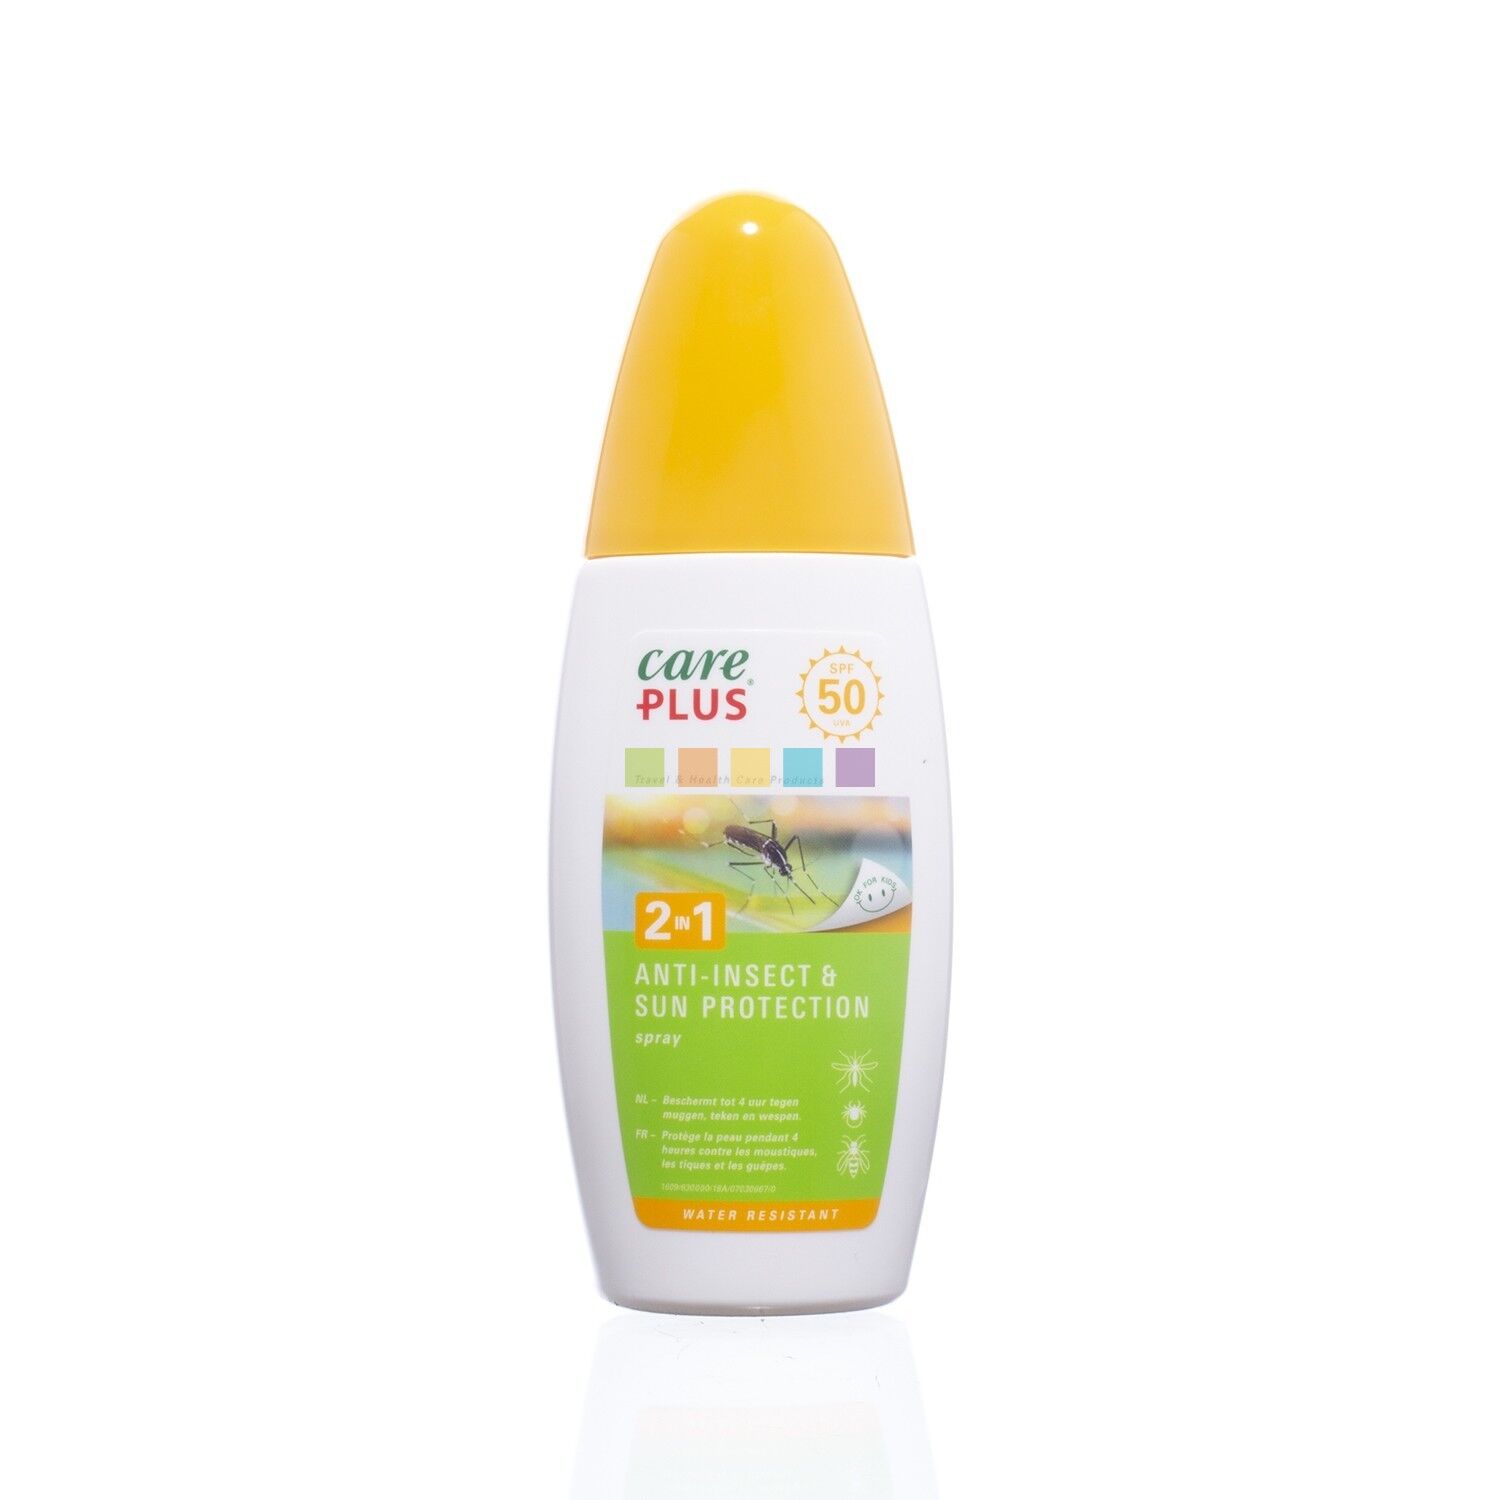 Care Plus 2in1 Anti-Insect & Sun Protection Spray SPF50 - Insektspray